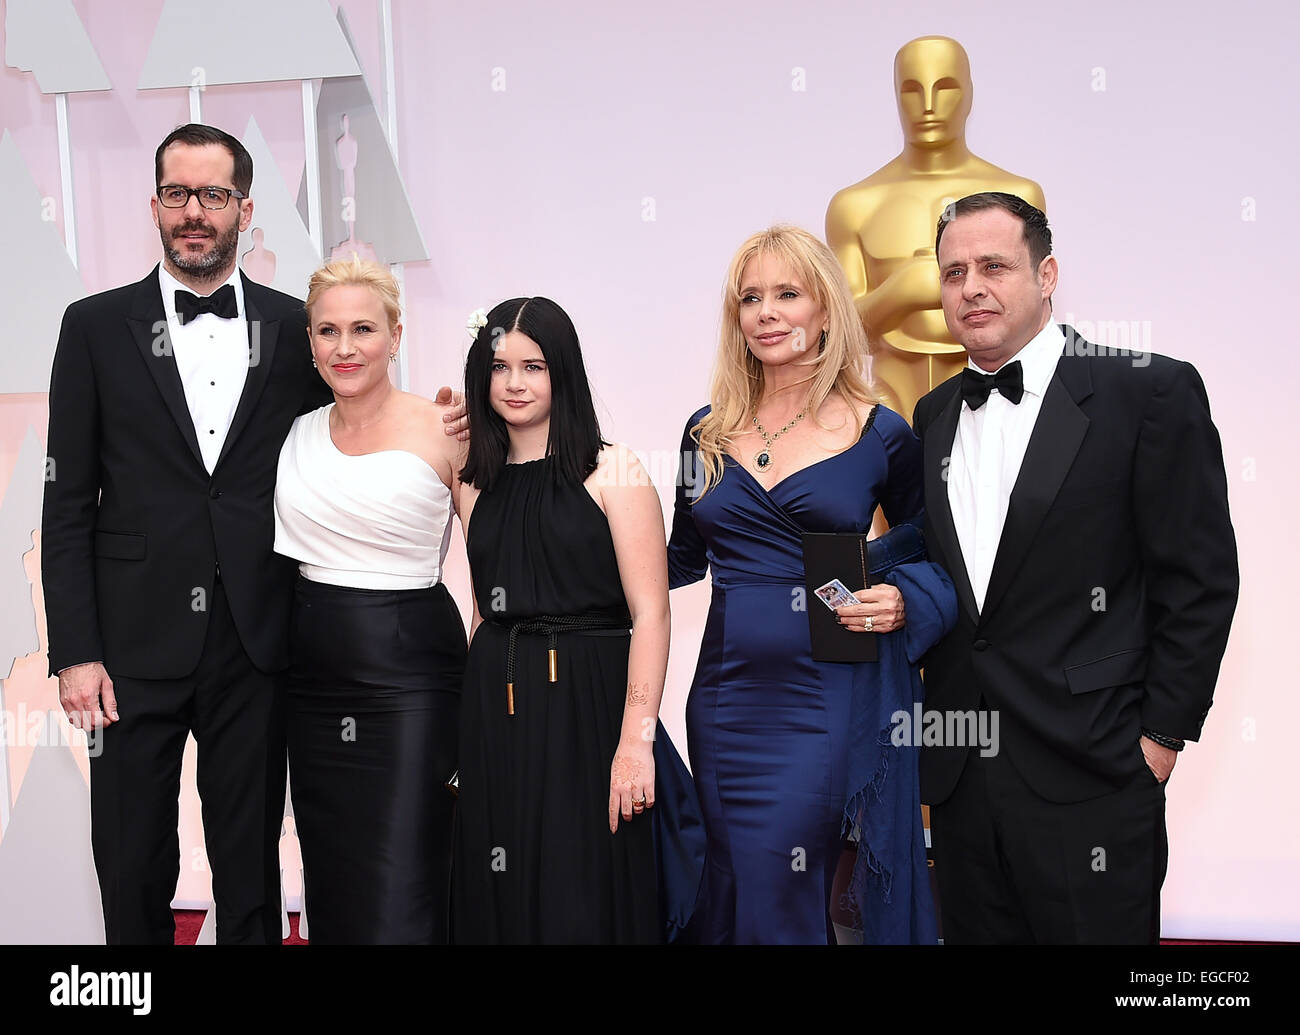 Hollywood, California, USA. 22nd Feb, 2015. Sisters PATRICIA ARQUETTE and ROSANNA ARQUETTE arriving at the 87th Academy Awards held at the Dolby Theatre in Hollywood, Los Angeles, CA, USA Credit:  Lisa O'Connor/ZUMA Wire/ZUMAPRESS.com/Alamy Live News Stock Photo